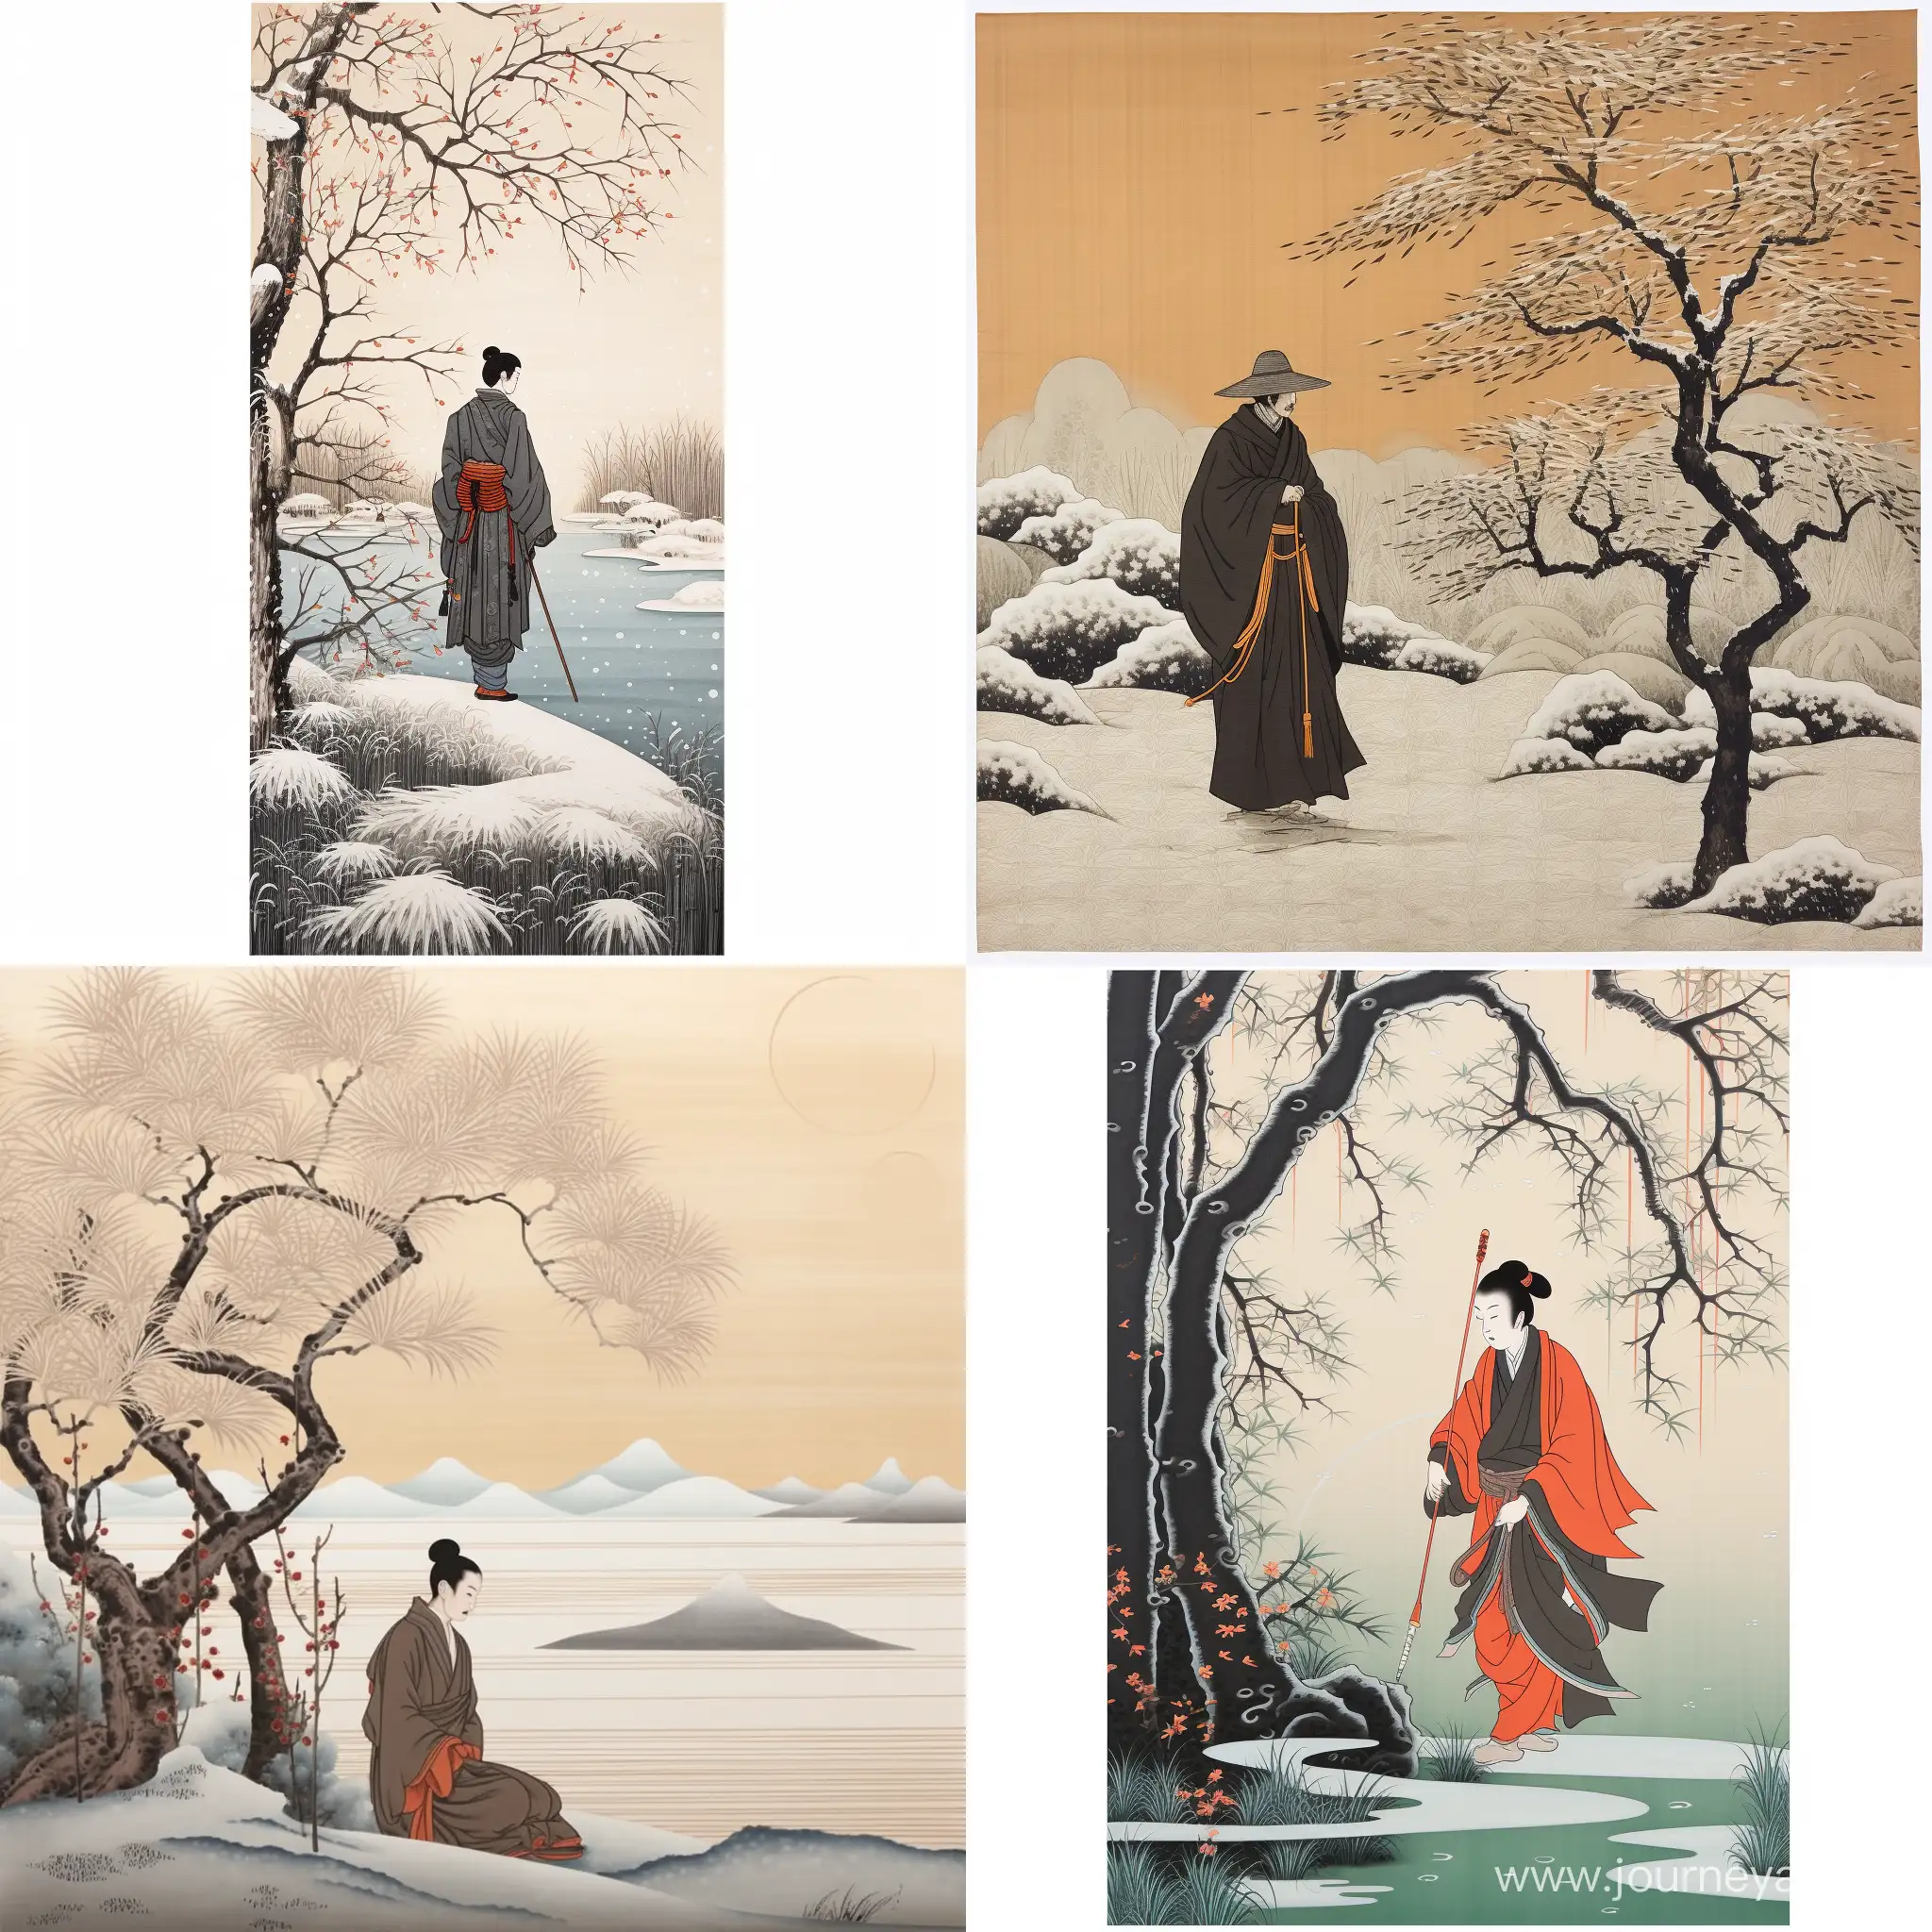 Japanese-Samurai-Sword-Practice-in-Snowy-Bamboo-Grove-by-the-Lakeside